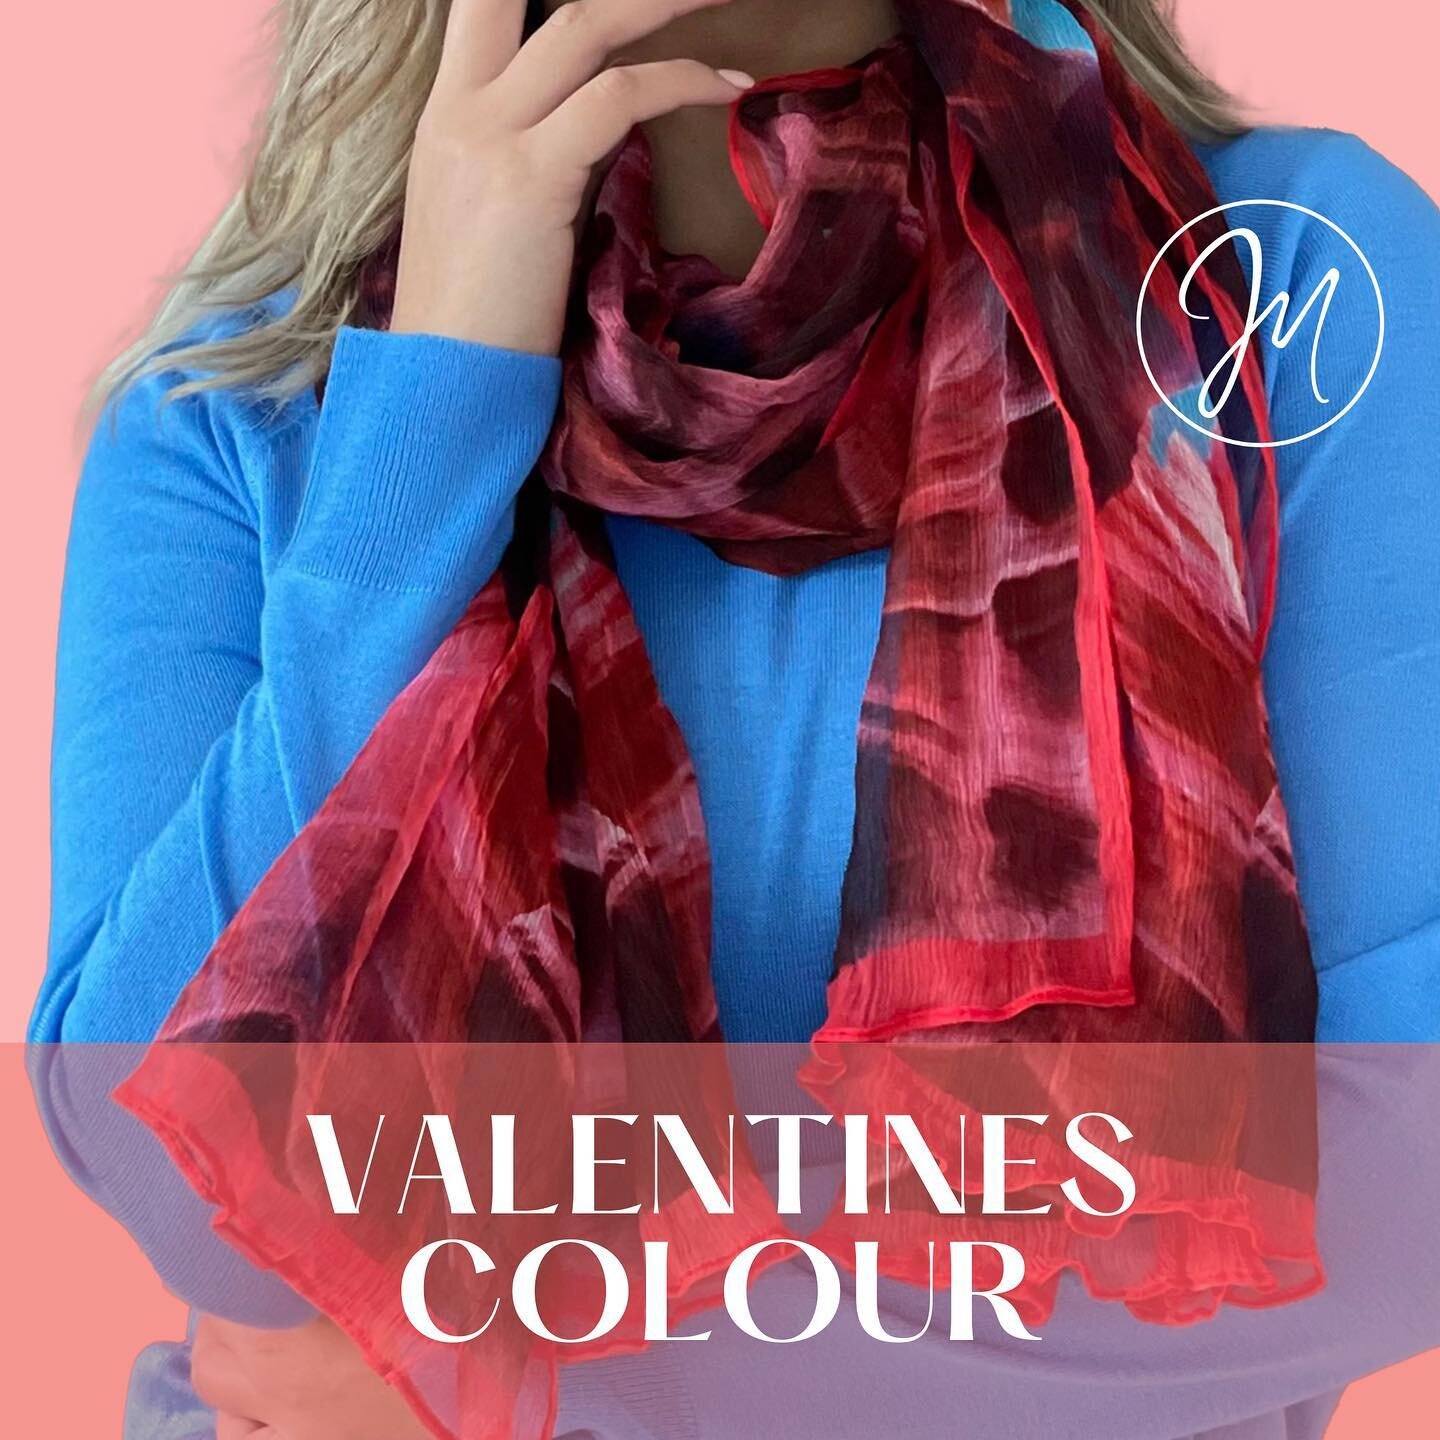 Valentines color for your loved one 💕💕💕 #silkscarfcanada